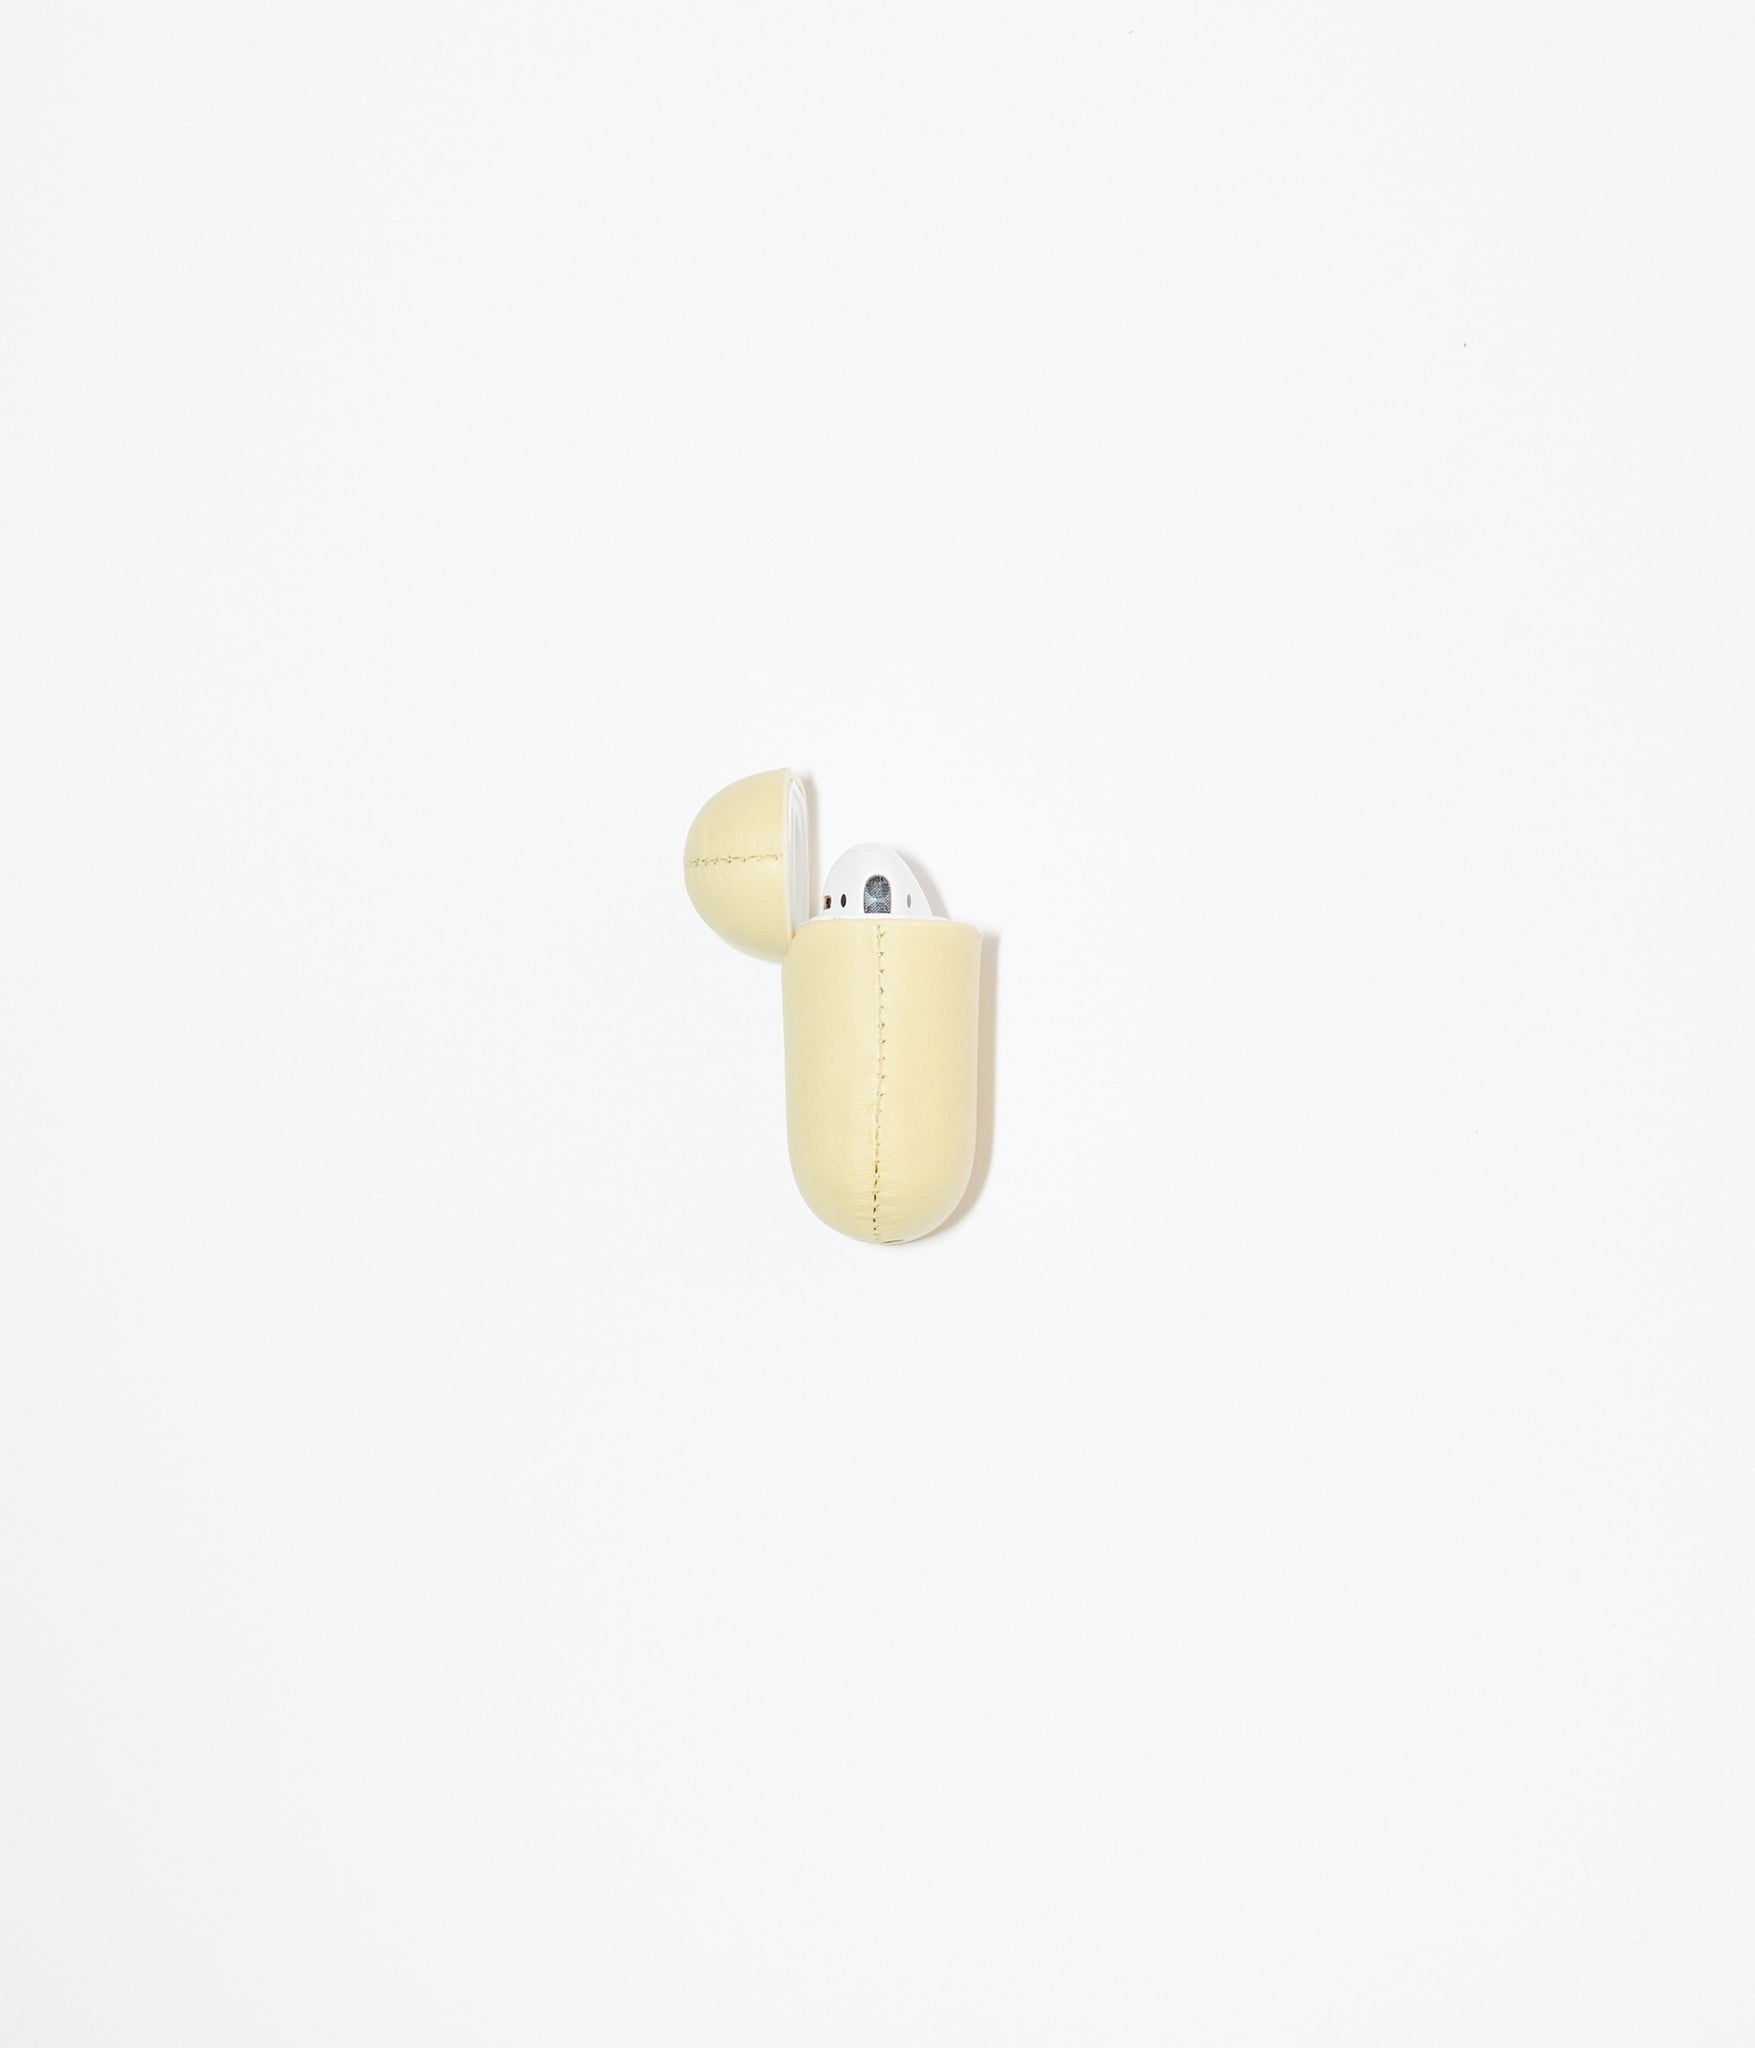 AirPods Case in Yellow